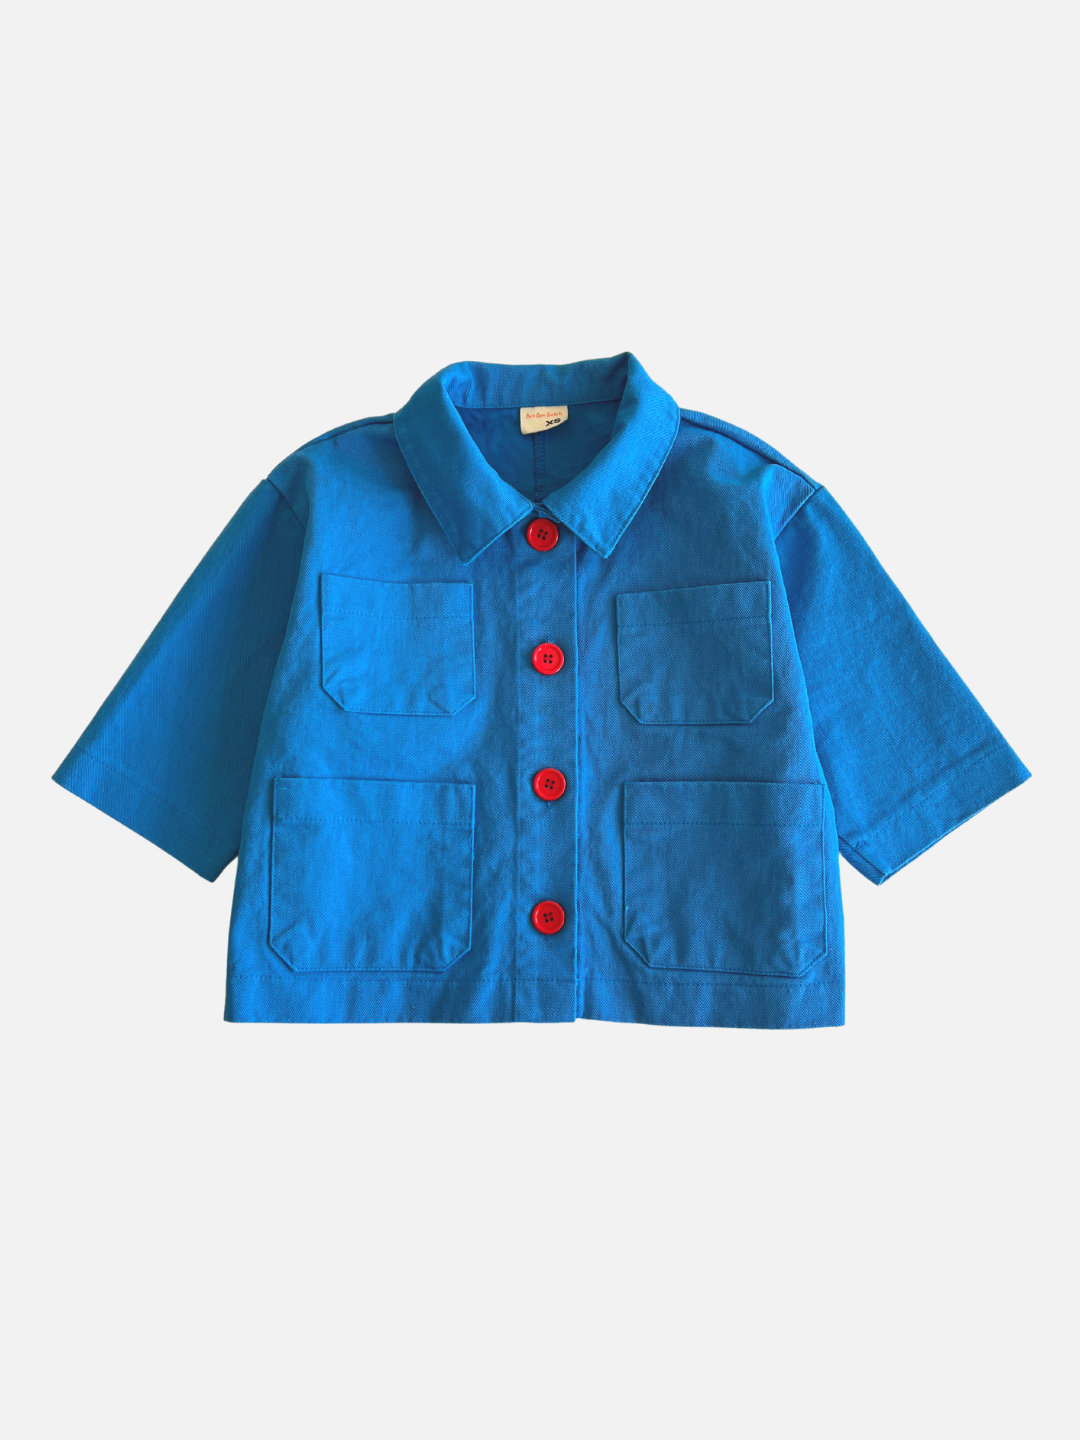 A kids' sky blue jacket with four pockets and four orange buttons